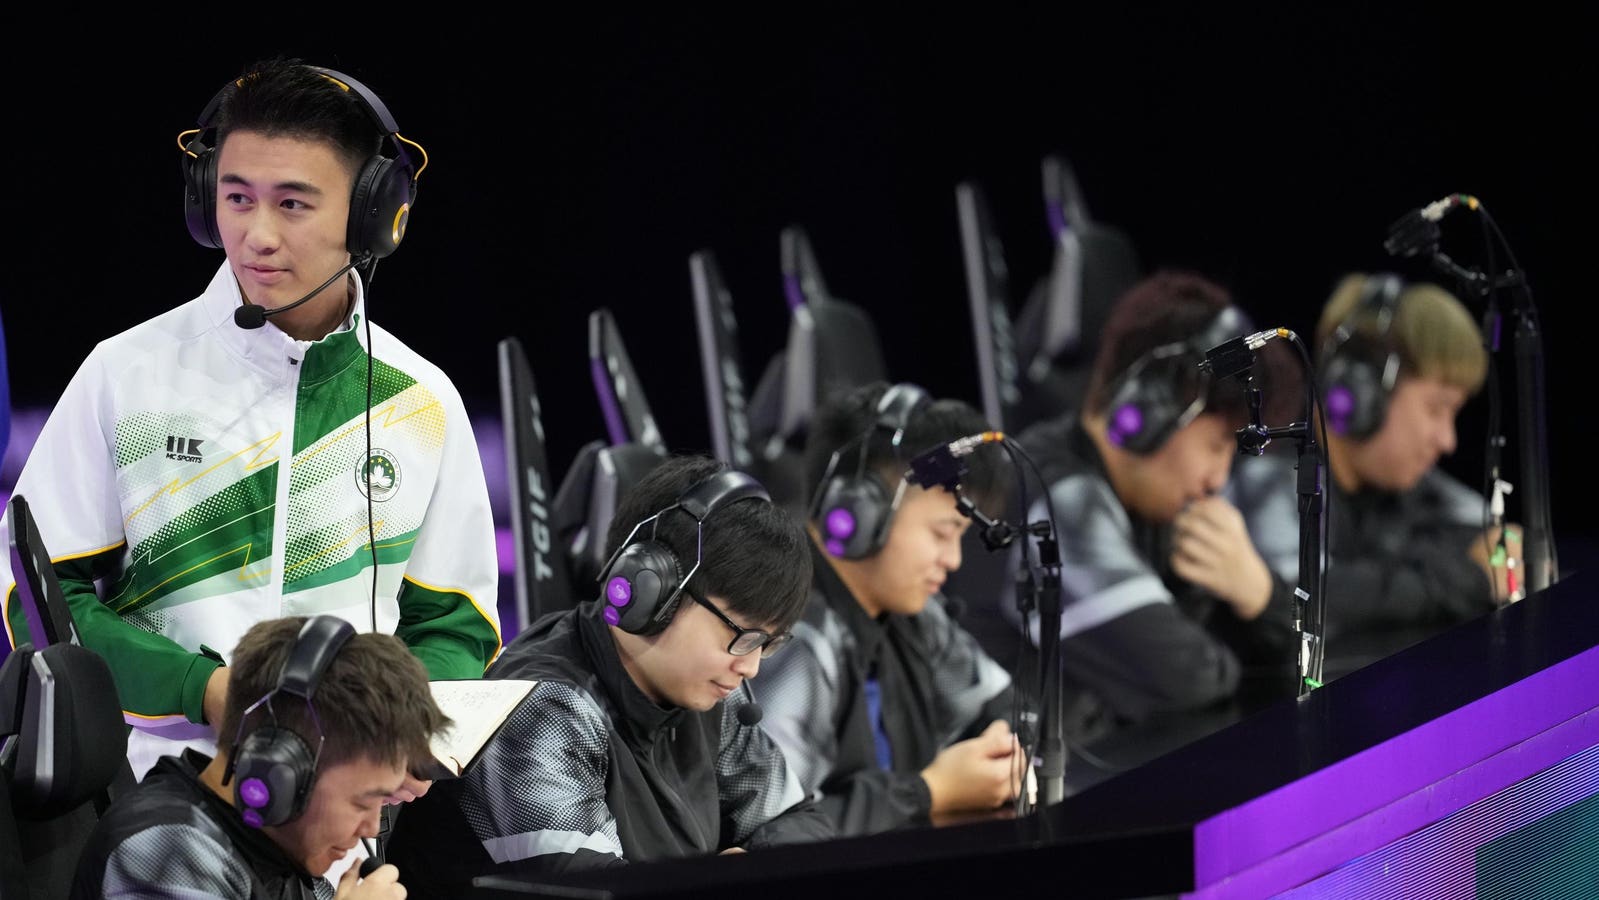 Esports Company Cofounded By Son Of Casino Magnate Stanley Ho Files For U.S. IPO